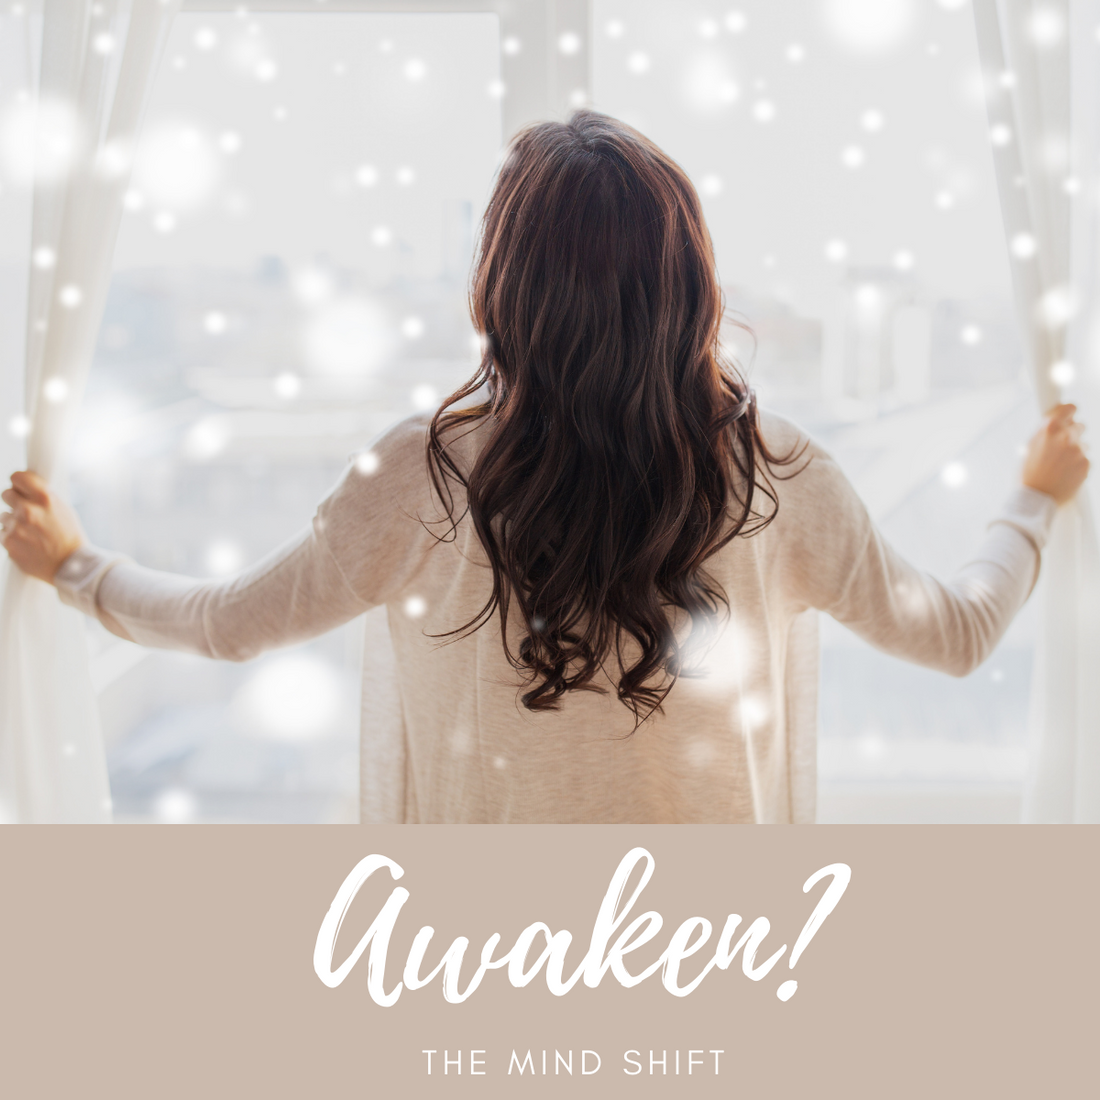 What does it mean to Awaken?